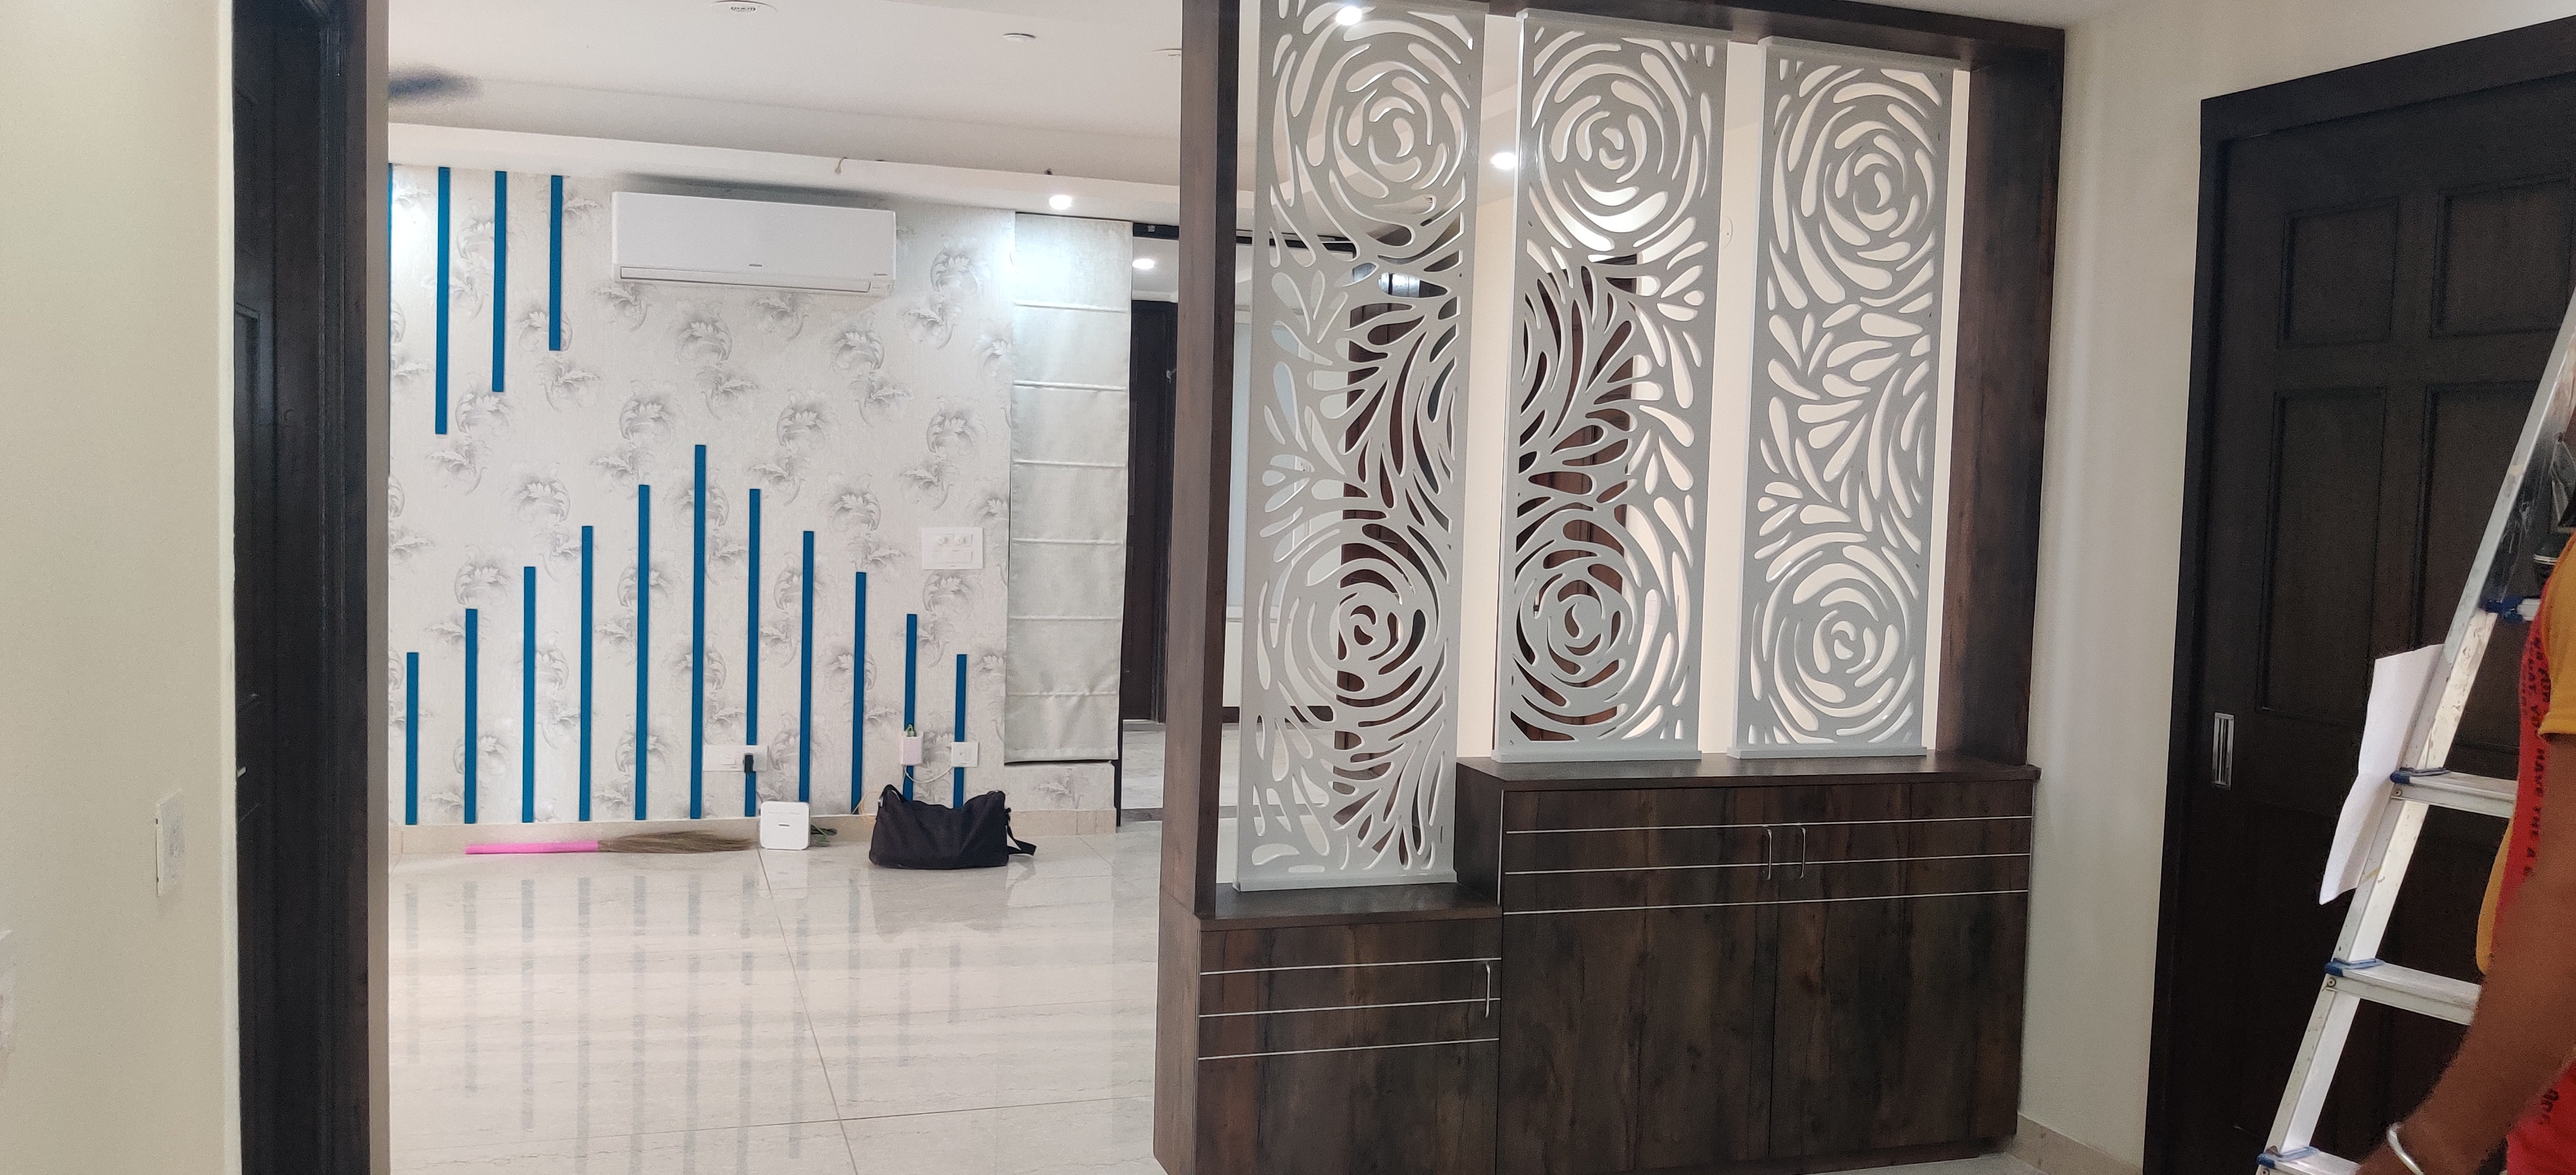 Wall Partition Design